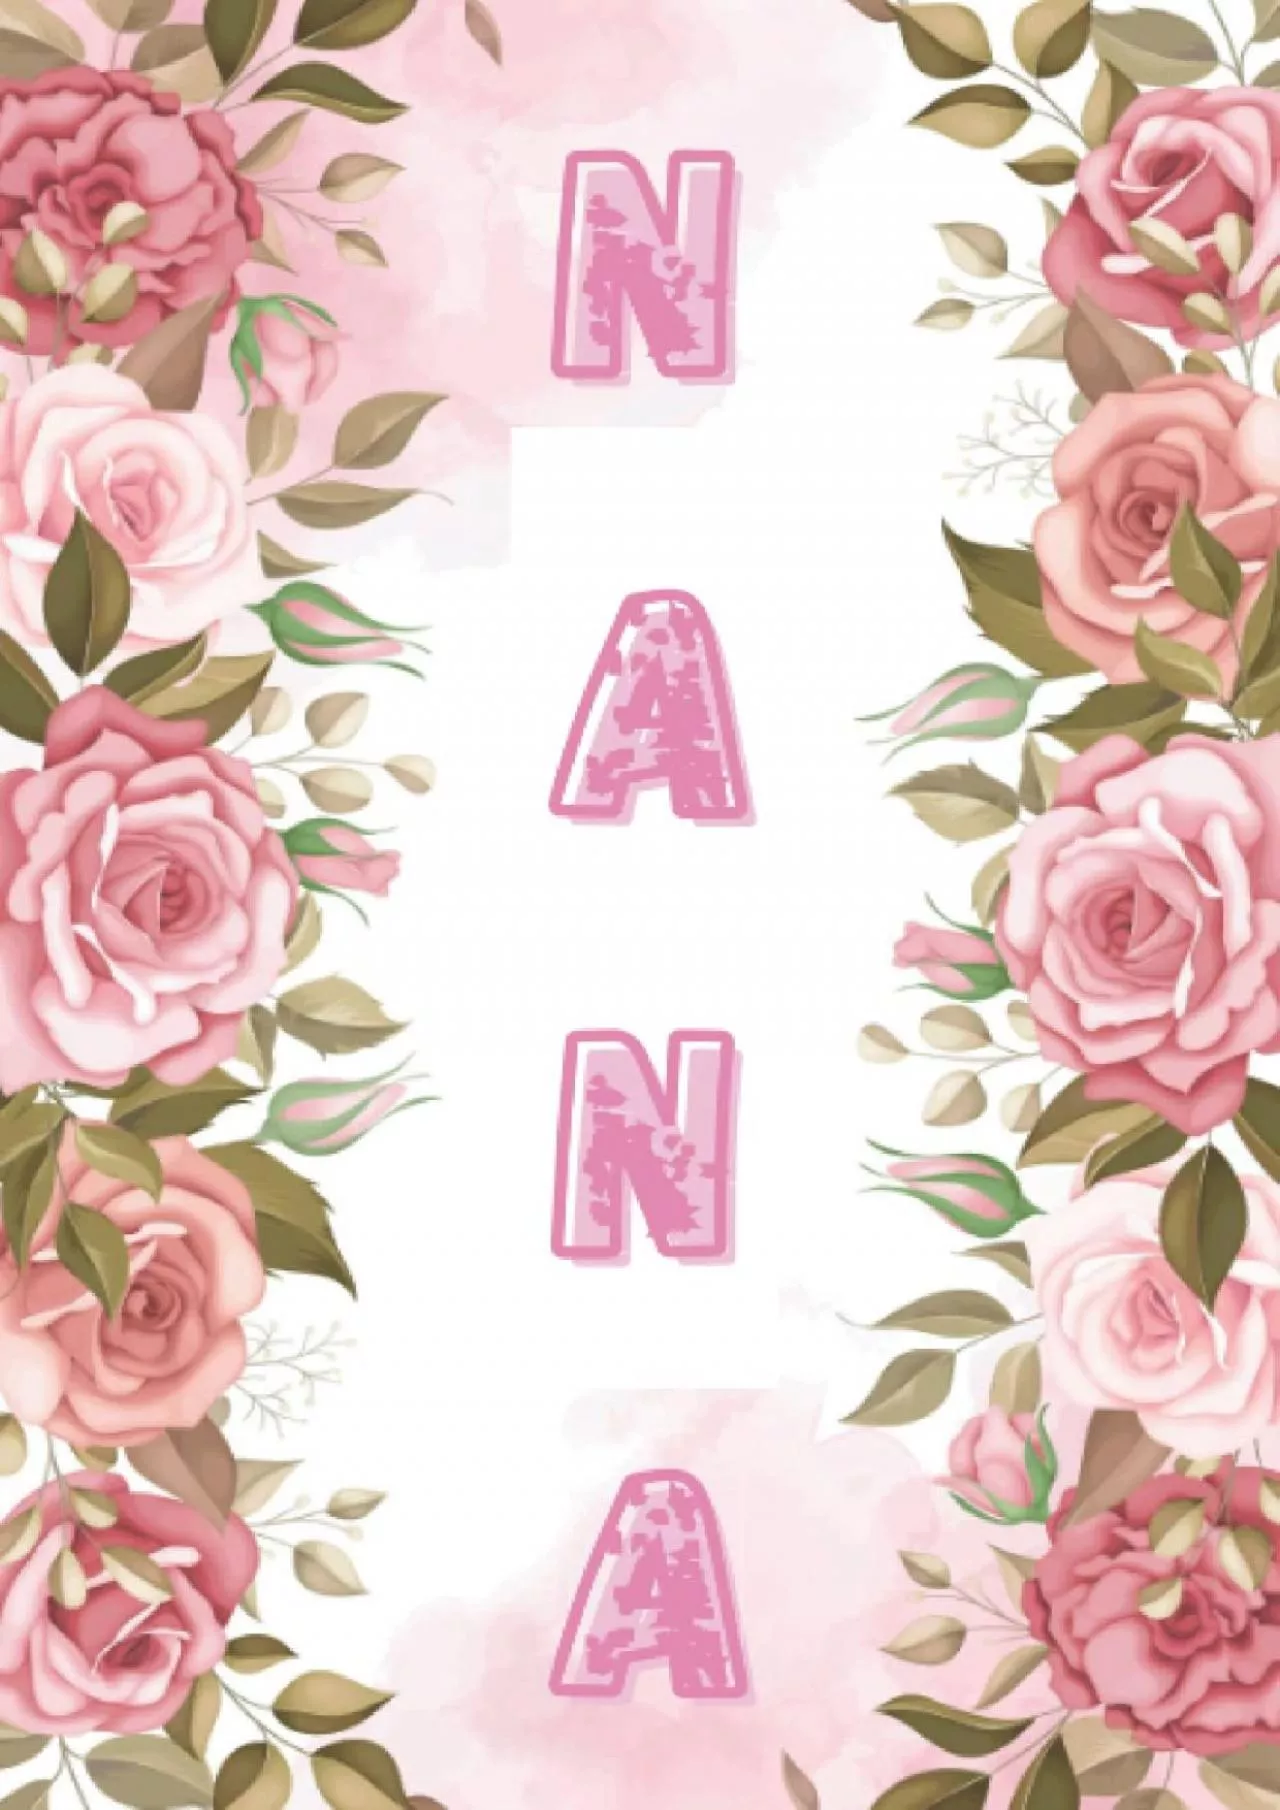 [EBOOK] NANA Gifts: NANA Notebook: Cute Lined Journal, Pink Flower, Floral 101 pages 6X9